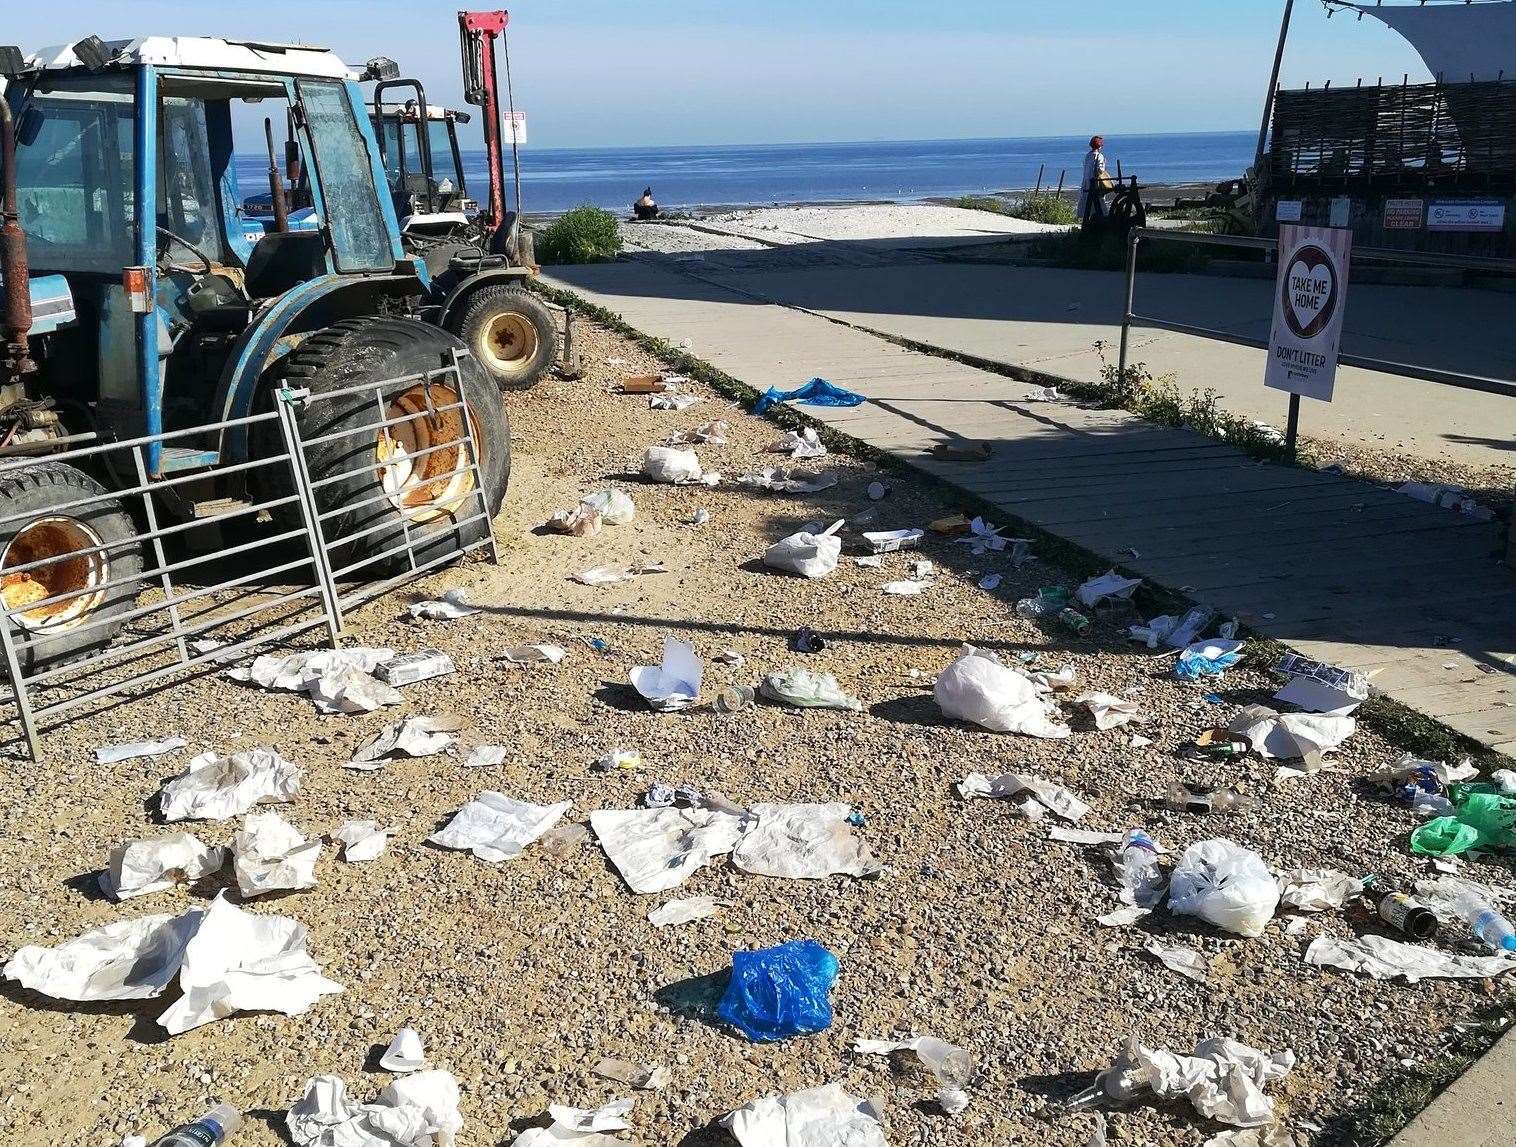 Some people say enforcement officers should be focussing on litter strewn at beaches in the Canterbury district instead. Picture: Daniel Farmer